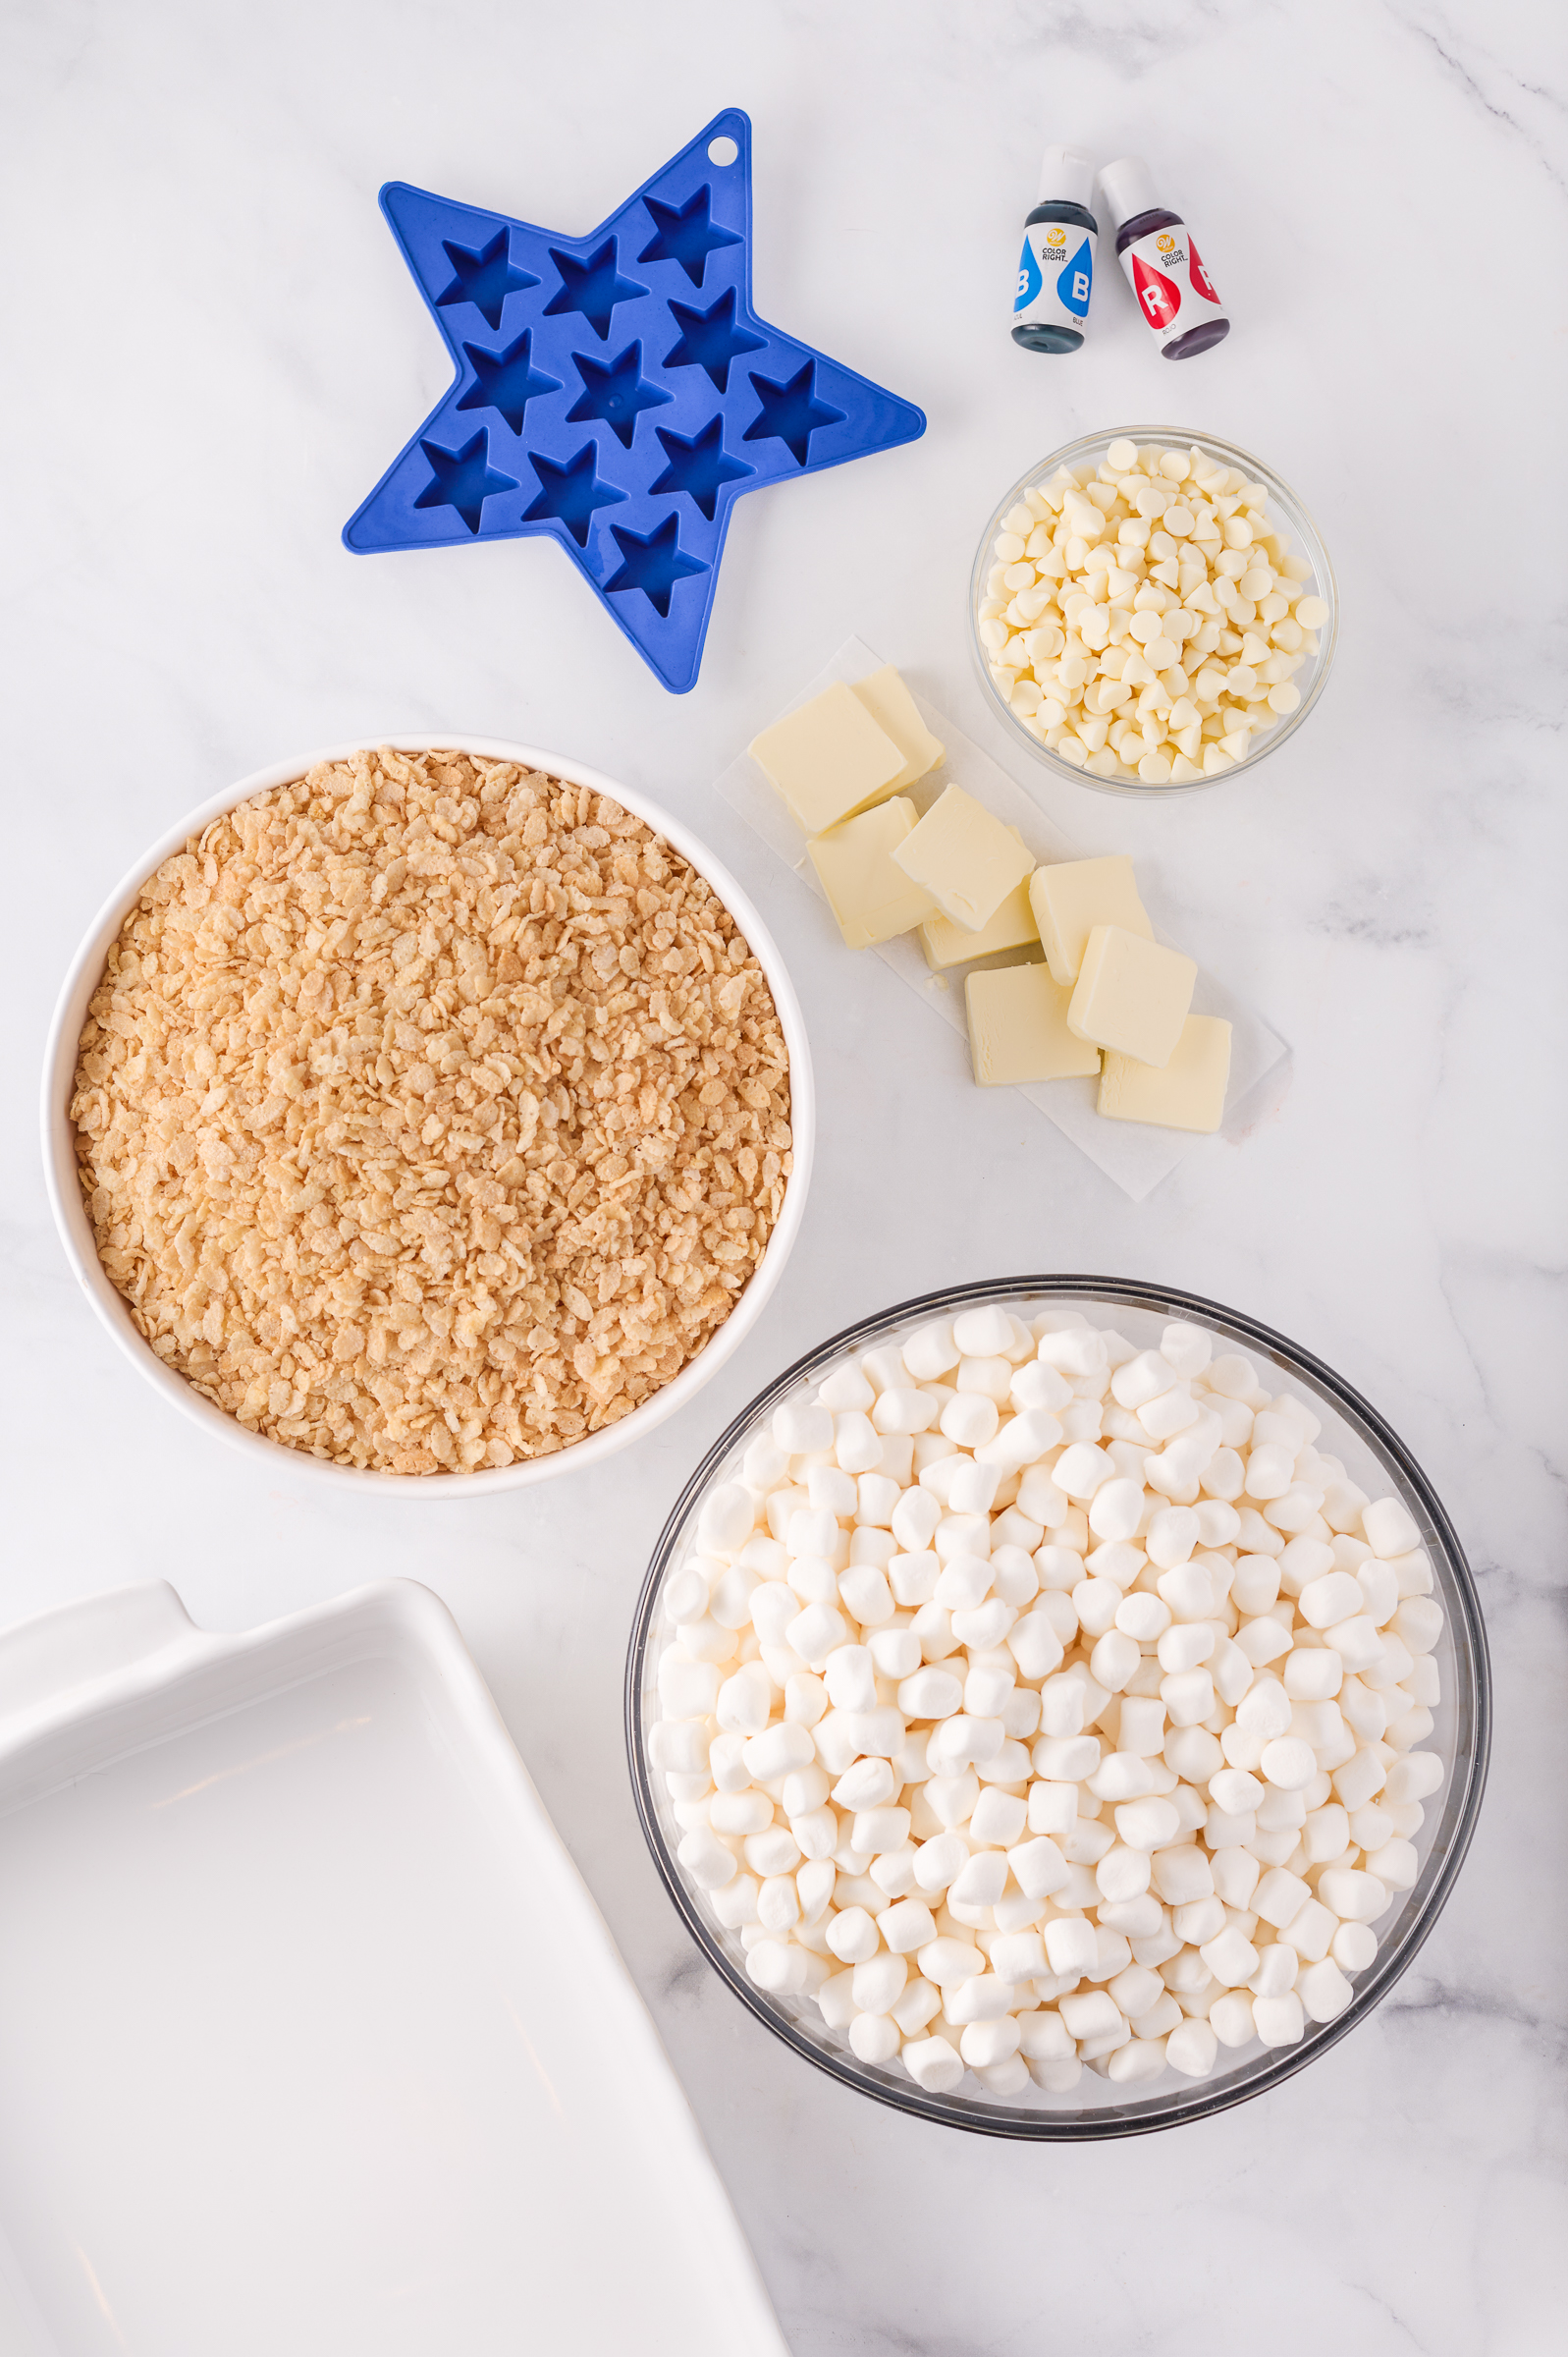 Ingredients to make 4th of July Rice Krispie Treats on a white marble surface